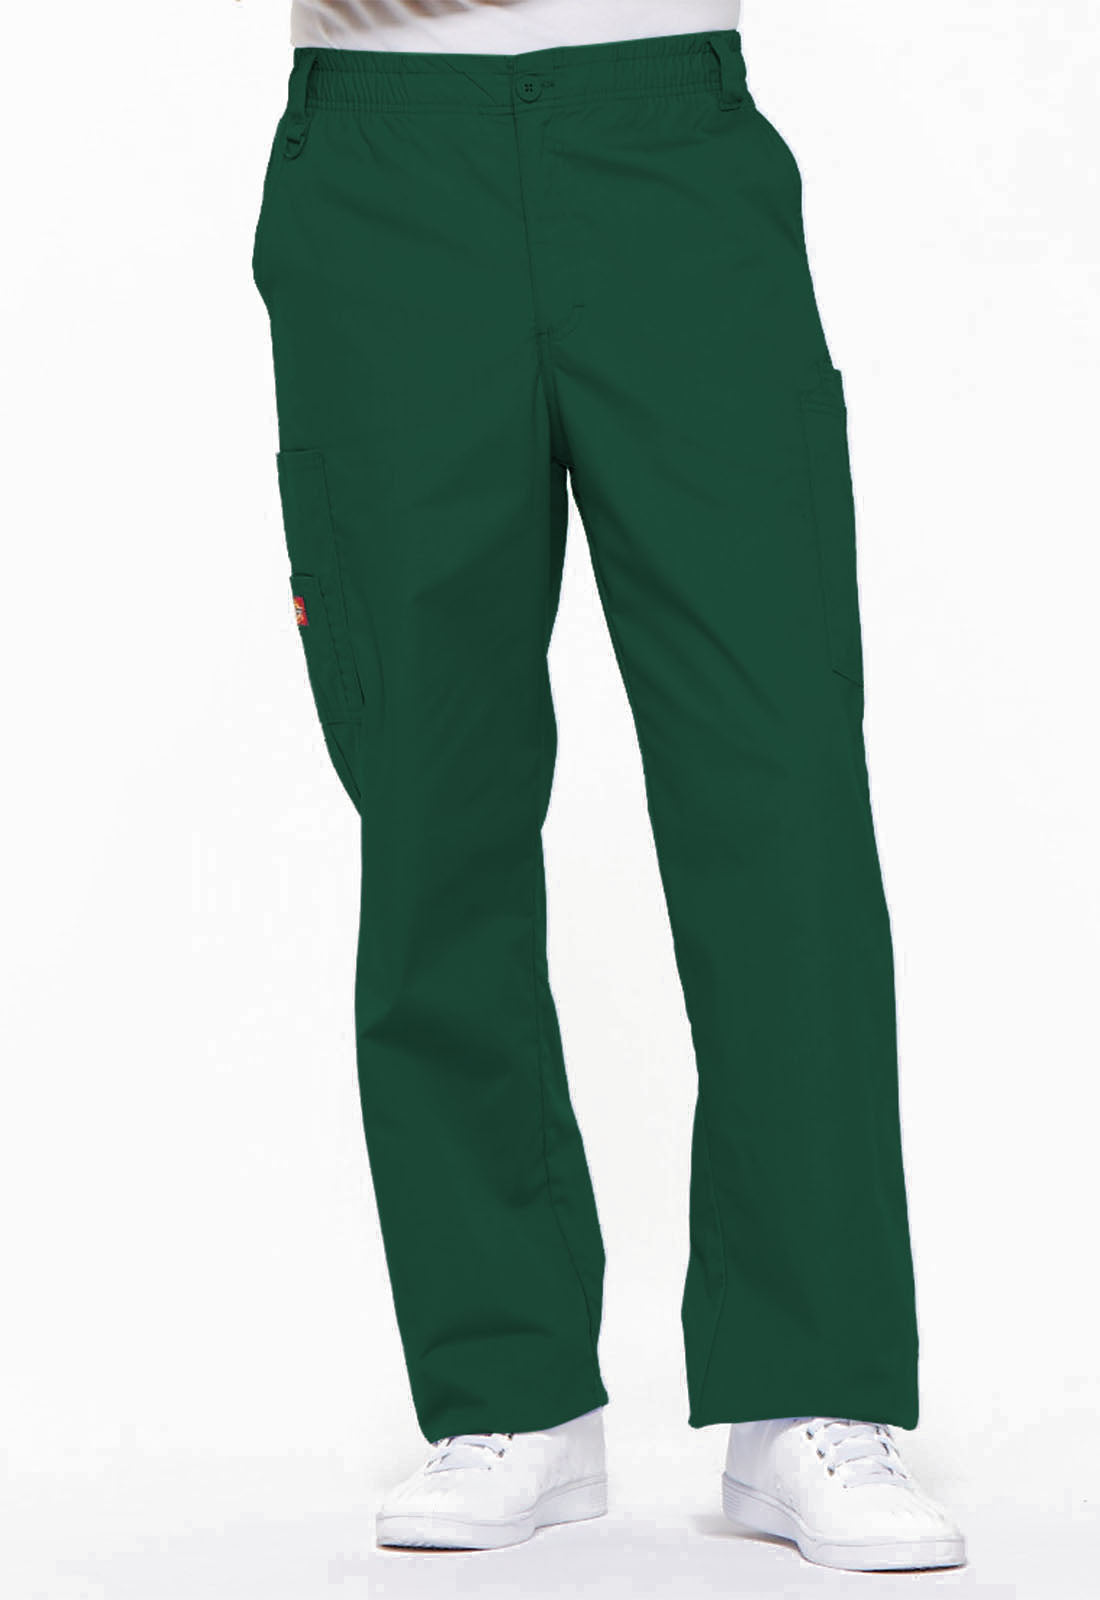 EDS Signature - Men's Zip Fly Pull-On Pant [1]